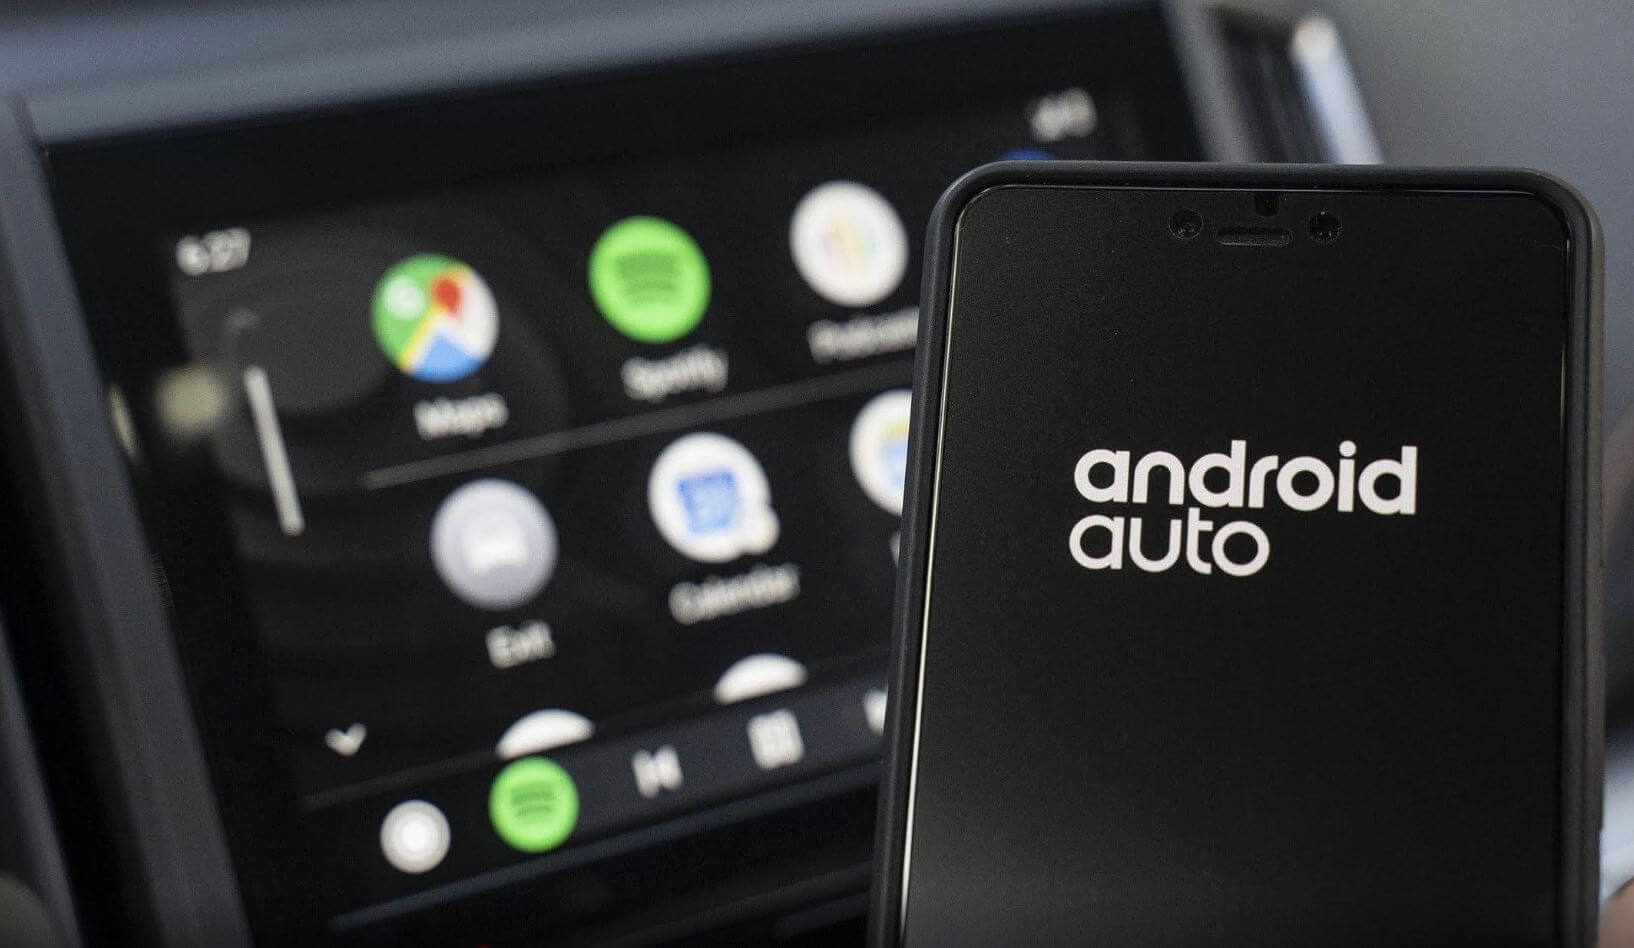 Androidauto. Android auto. Android auto приложение. Приложение WIFI Android auto. Android auto 6.9.613724.